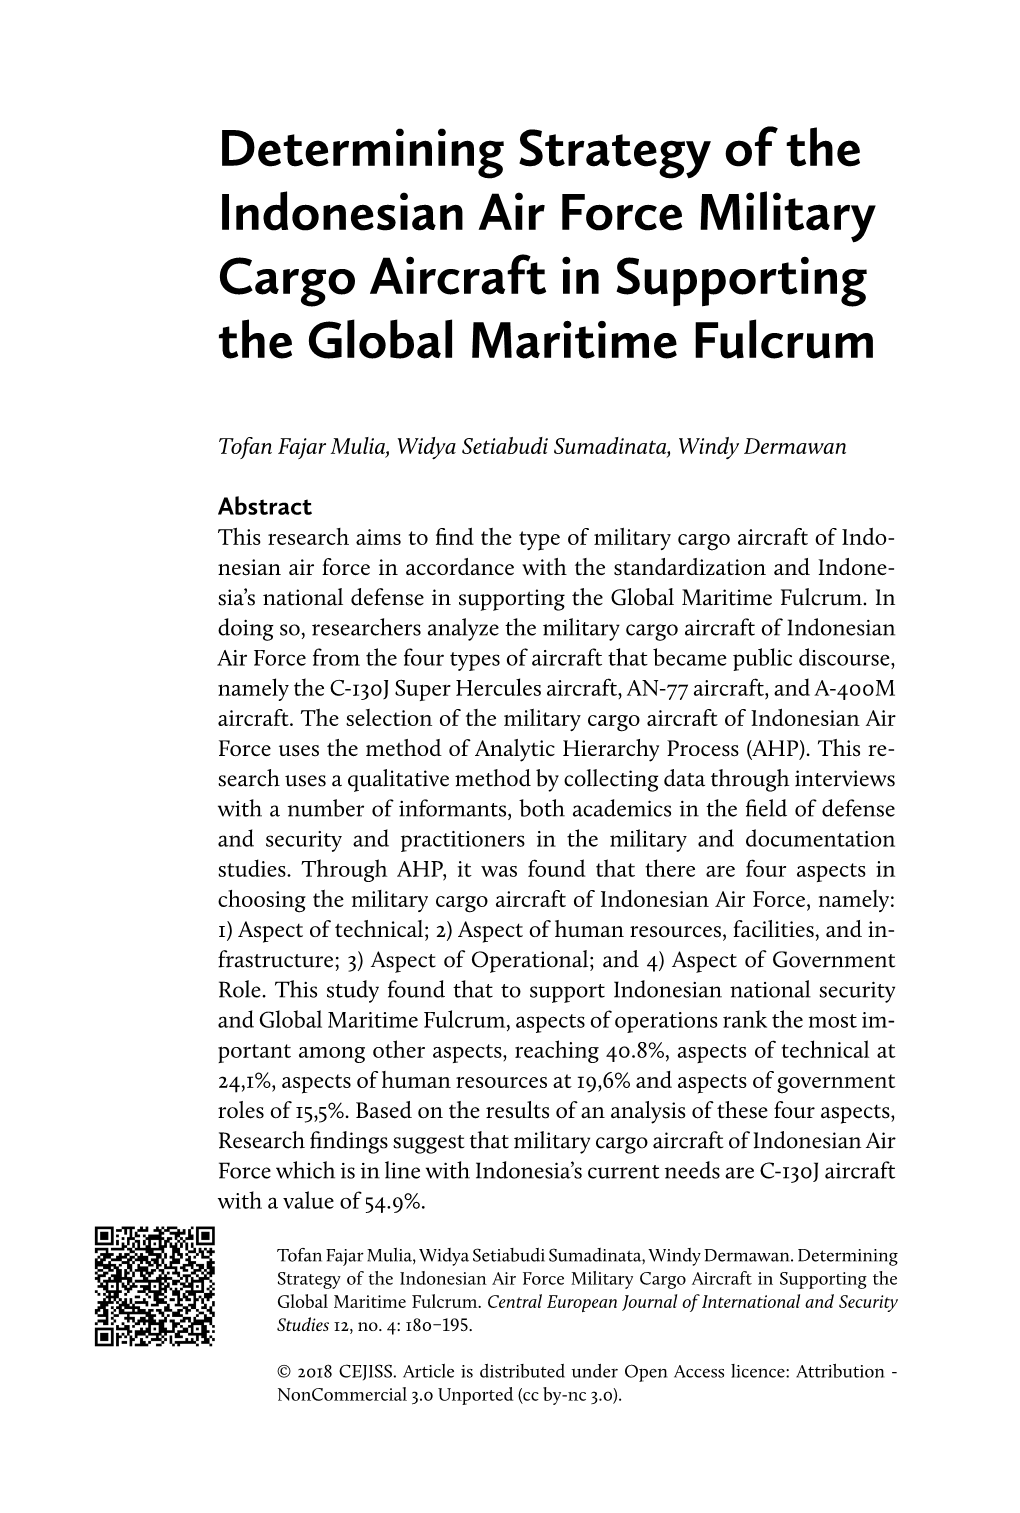 Determining Strategy of the Indonesian Air Force Military Cargo Aircraft in Supporting the Global Maritime Fulcrum